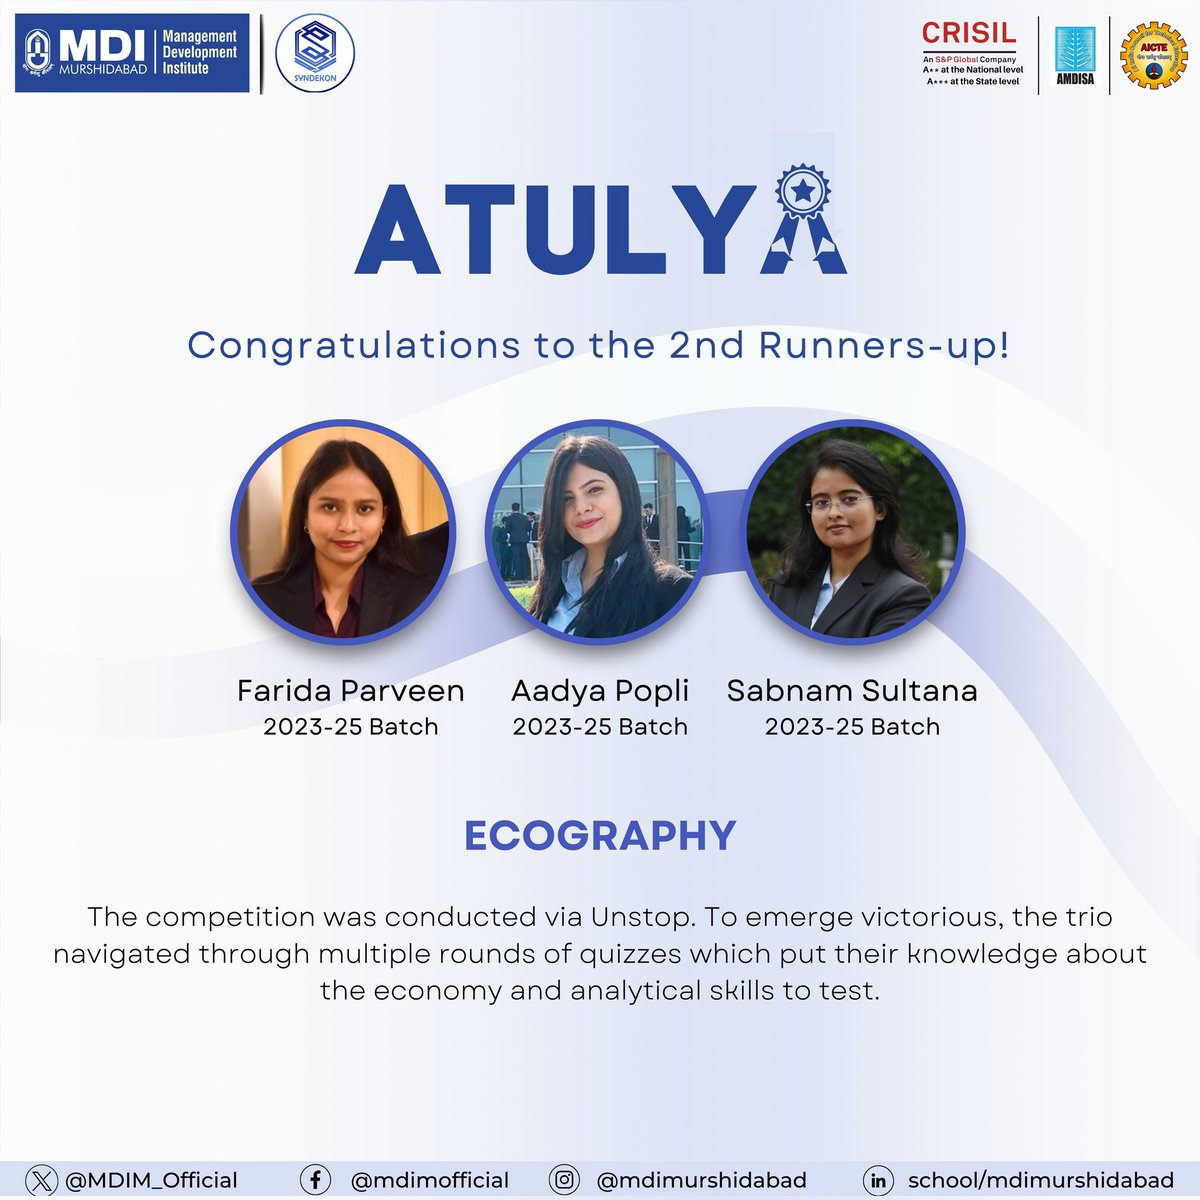 With great pleasure and immense pride, #MDI Murshidabad announces that Aadya Popli, Farida Parveen and Sabnam Sultana have secured the 2nd Runners-up position in #Ecography conducted via #Unstop. #MBA #MDIM #Management